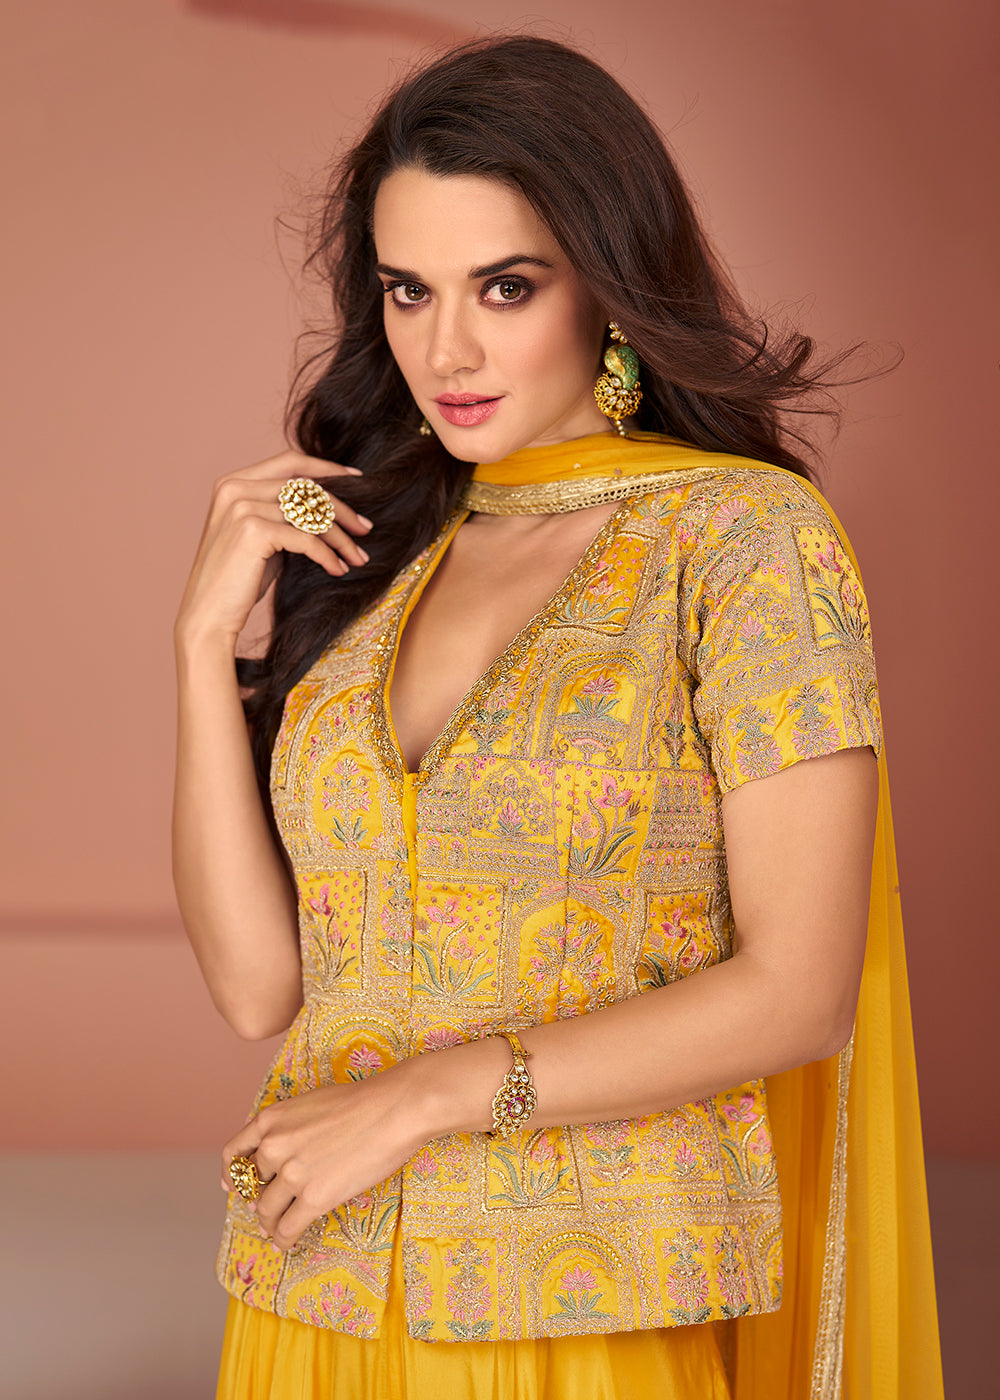 Buy Now Yellow Embroidered Georgette Indo Western Palazzo Suit Online in USA, UK, Canada, Germany, Australia & Worldwide at Empress Clothing.